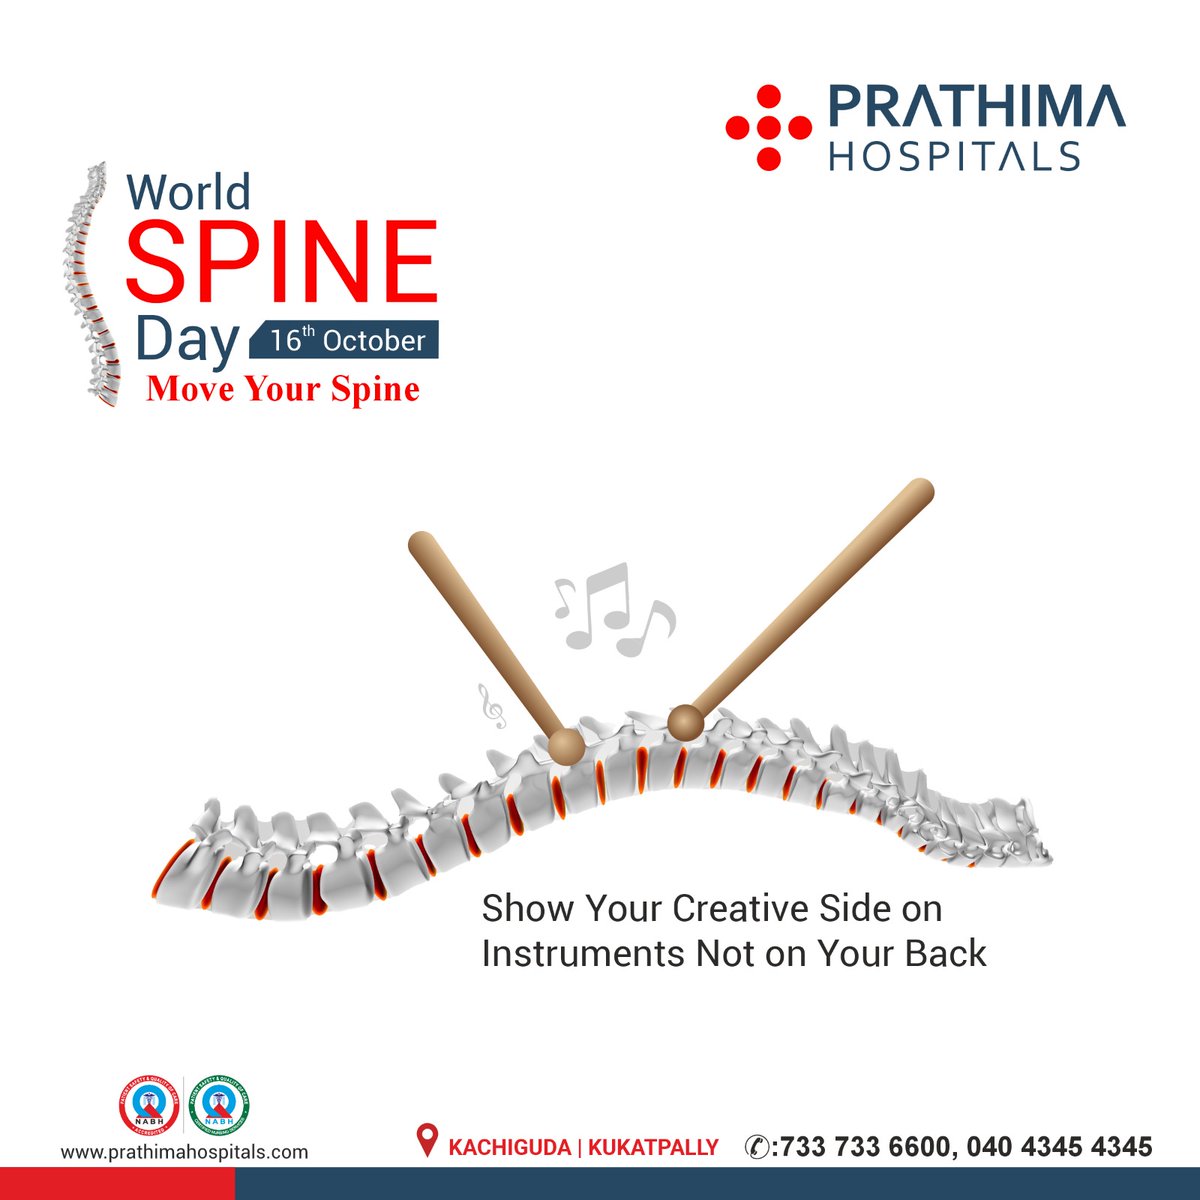 Show Your Creative Side on Instruments Not on Your Back.

Consult Our Doctors for Checkup
📅:: prathimahospitals.com/book-appointme…
📞:: 733 733 6600 | 040 4345 4345

#WorldSpineDay #LoveYourSpine #HealthyBack #SpineHealth #BackPainAwareness #PostureMatters #StrongBack  #prathimahospitals #ph